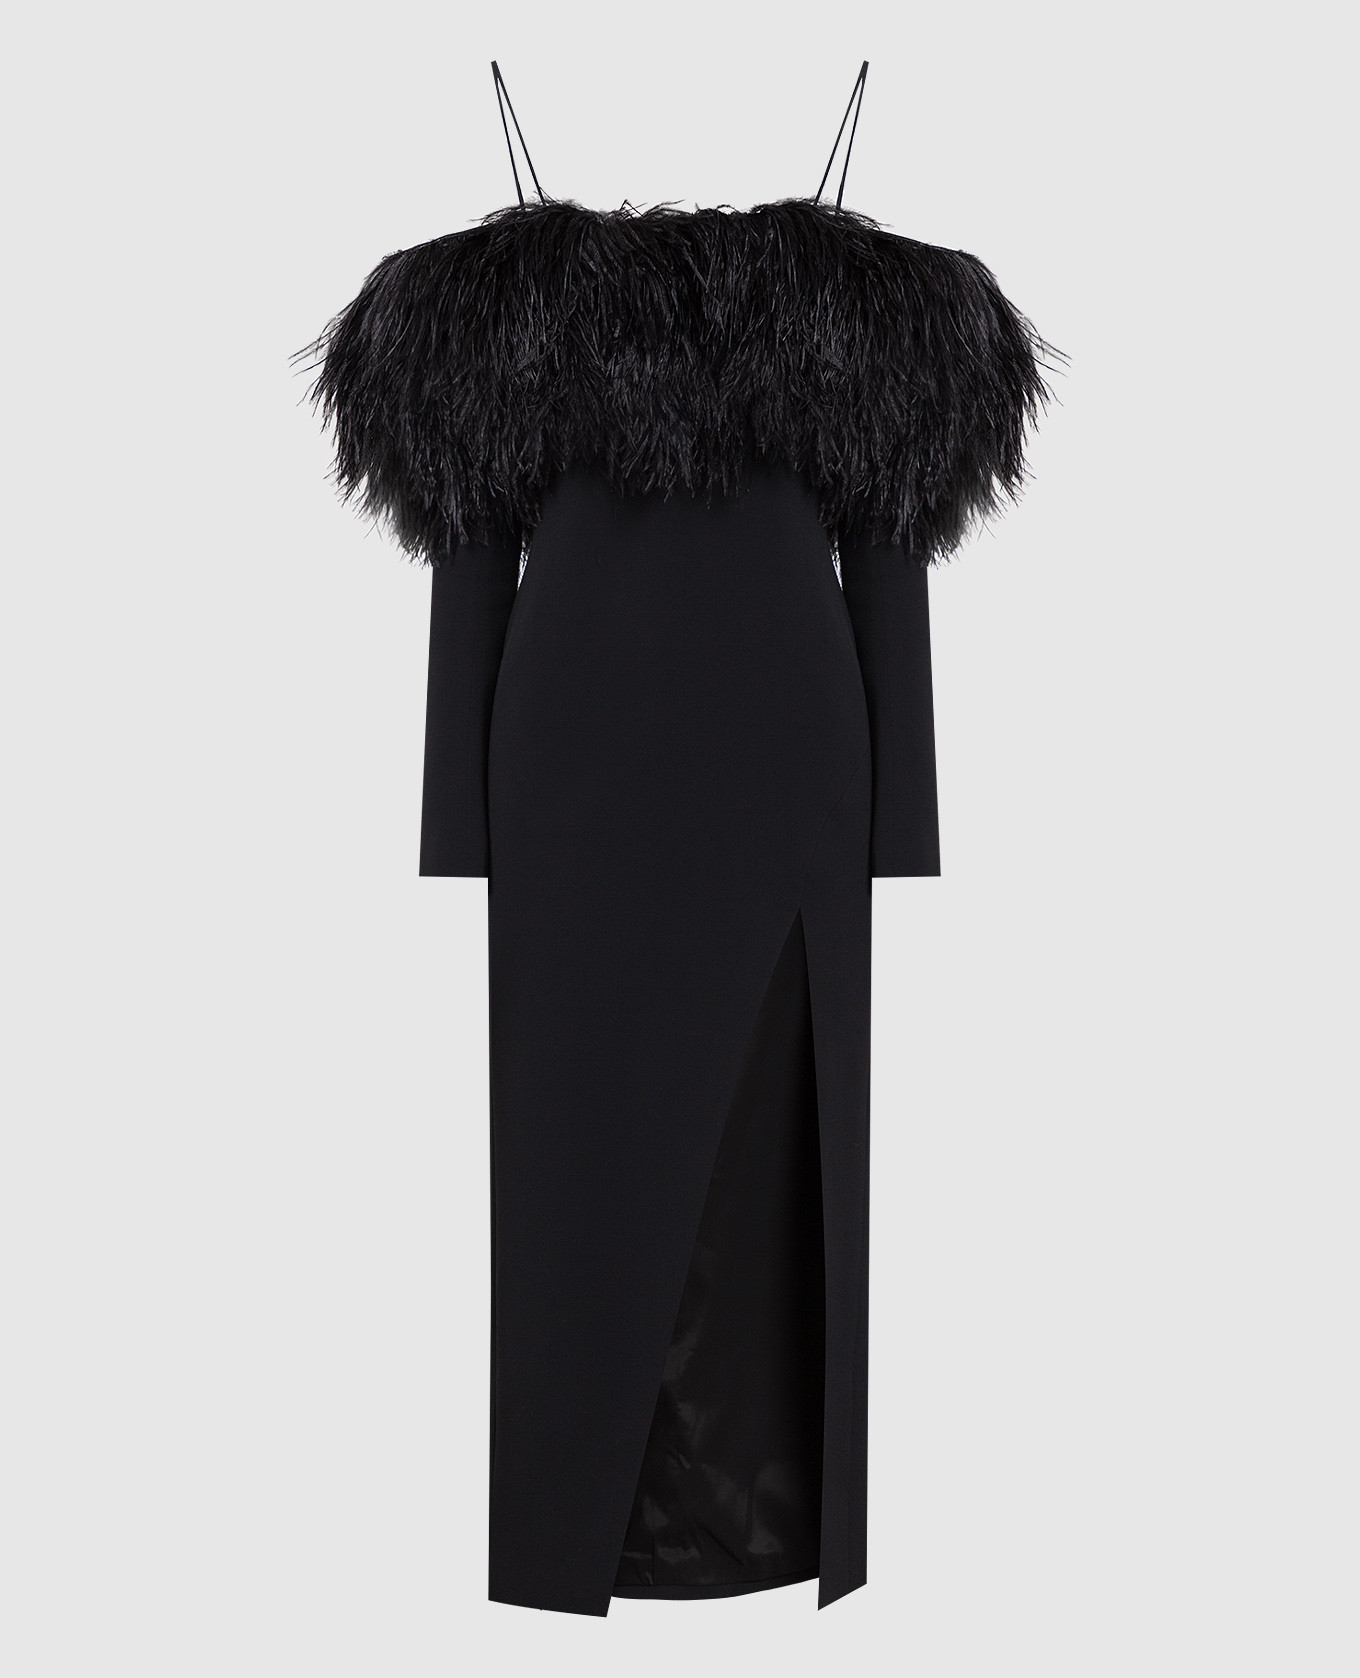 Black dress with feathers and cutout